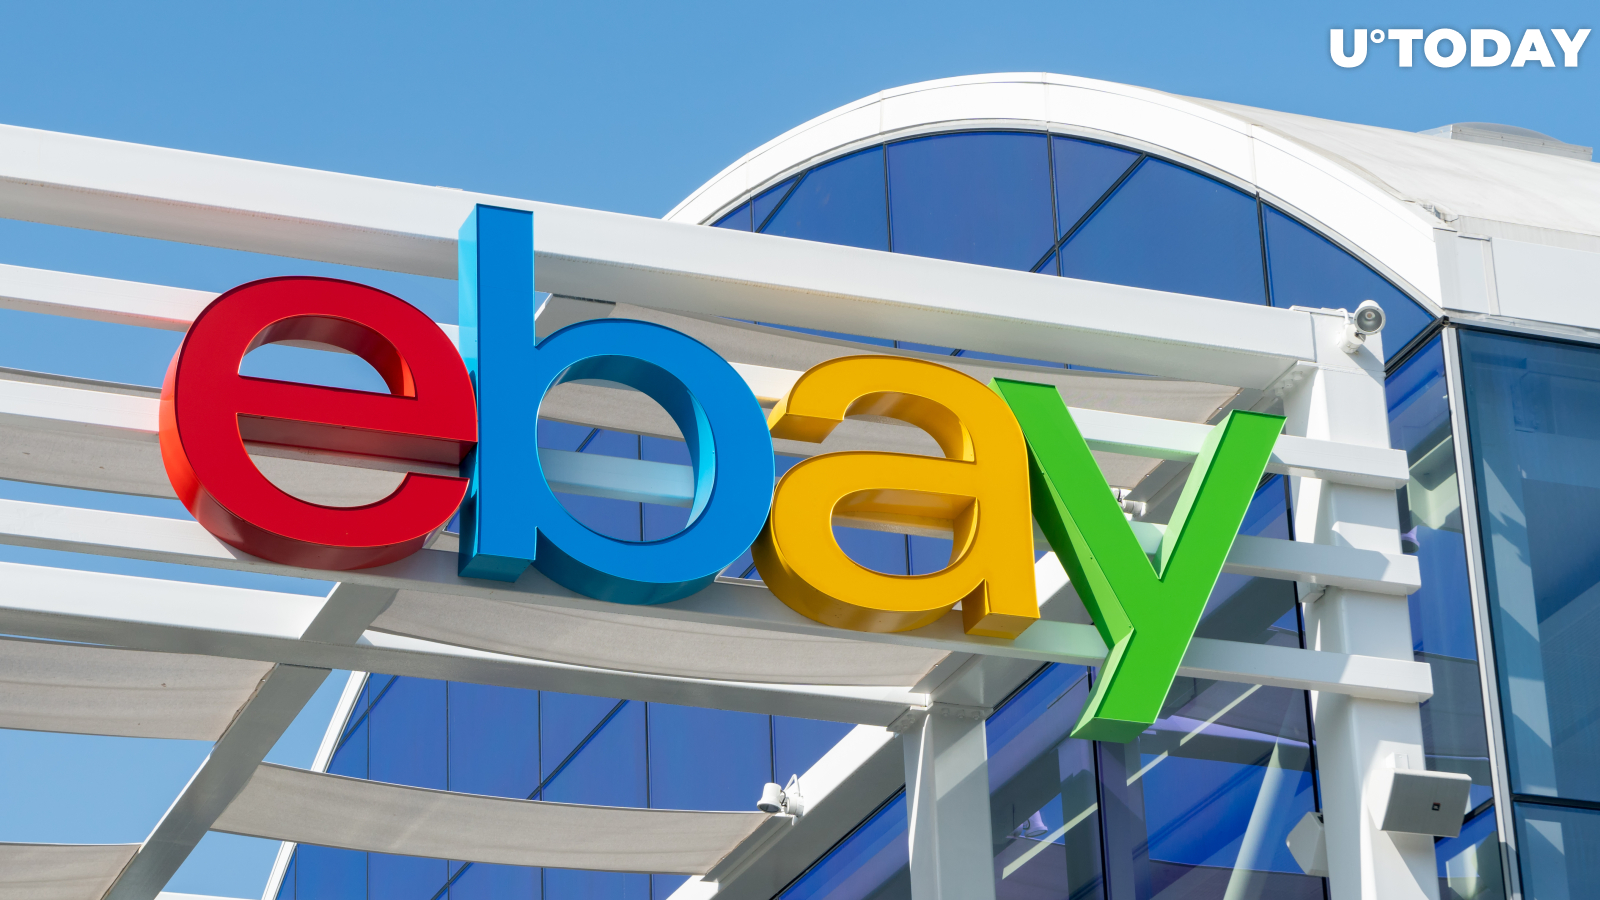 "Free Bitcoin" Now Available to eBay Users 